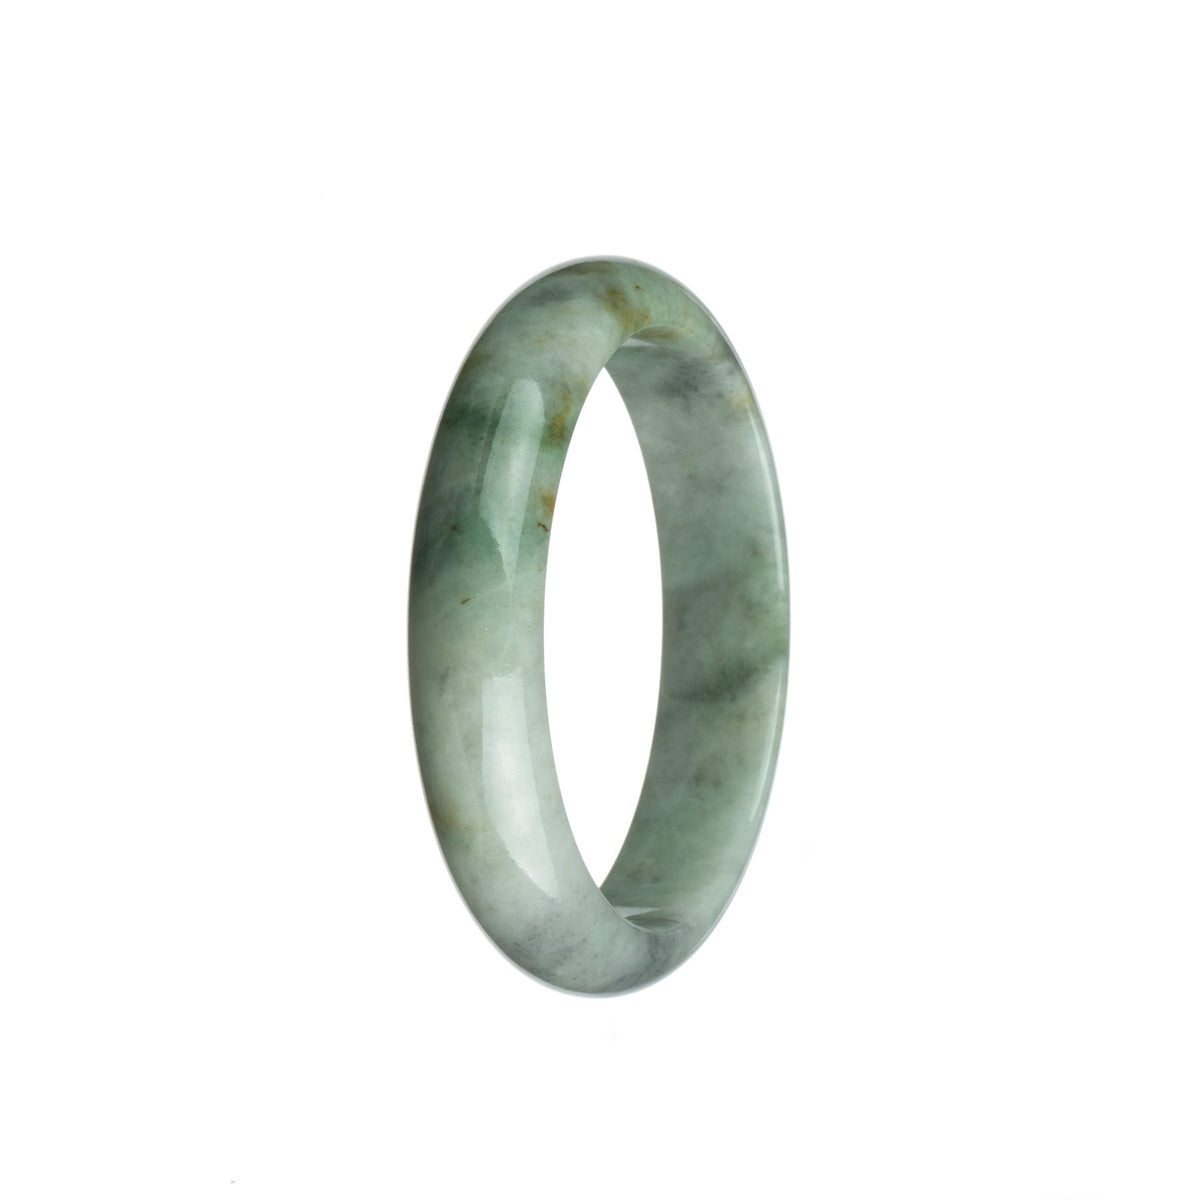 Genuine Grade A Whitish Grey with Green and Yellow Traditional Jade Bangle Bracelet - 55mm Half Moon